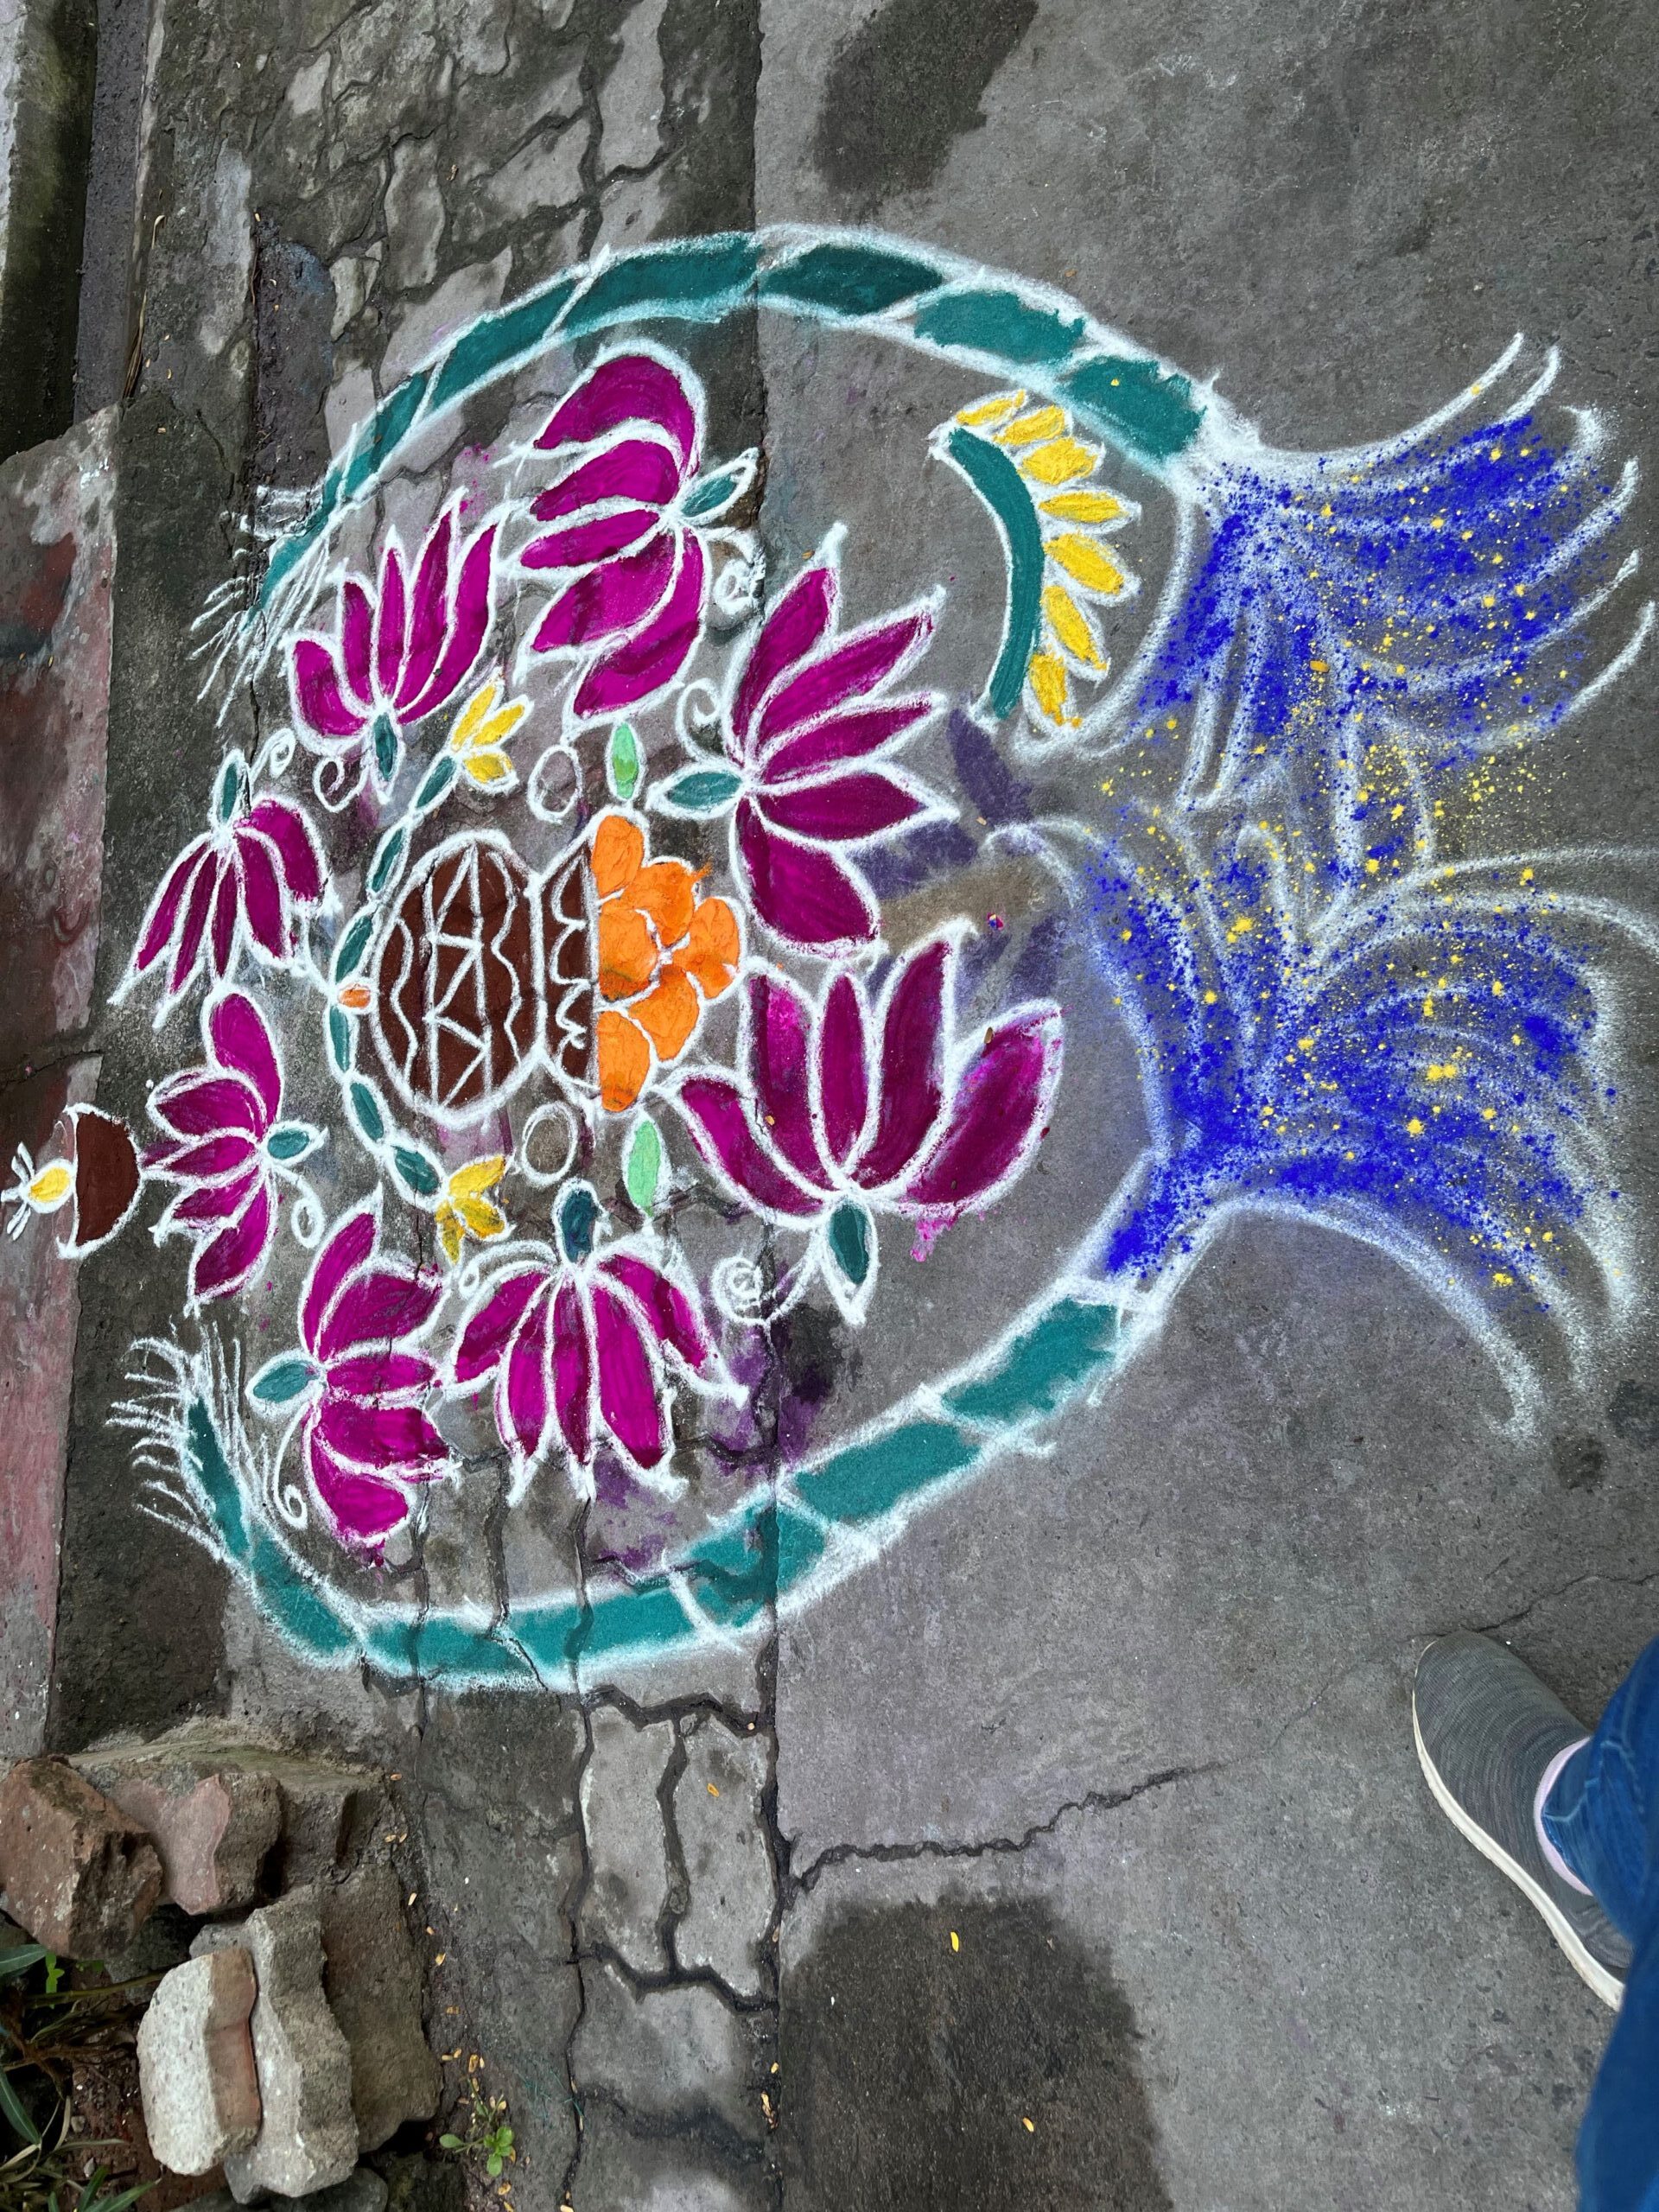 RANGOLIS OUTSIDE THE HOUSES AT PONGAL FESTIVAL IN PONDICHERRY